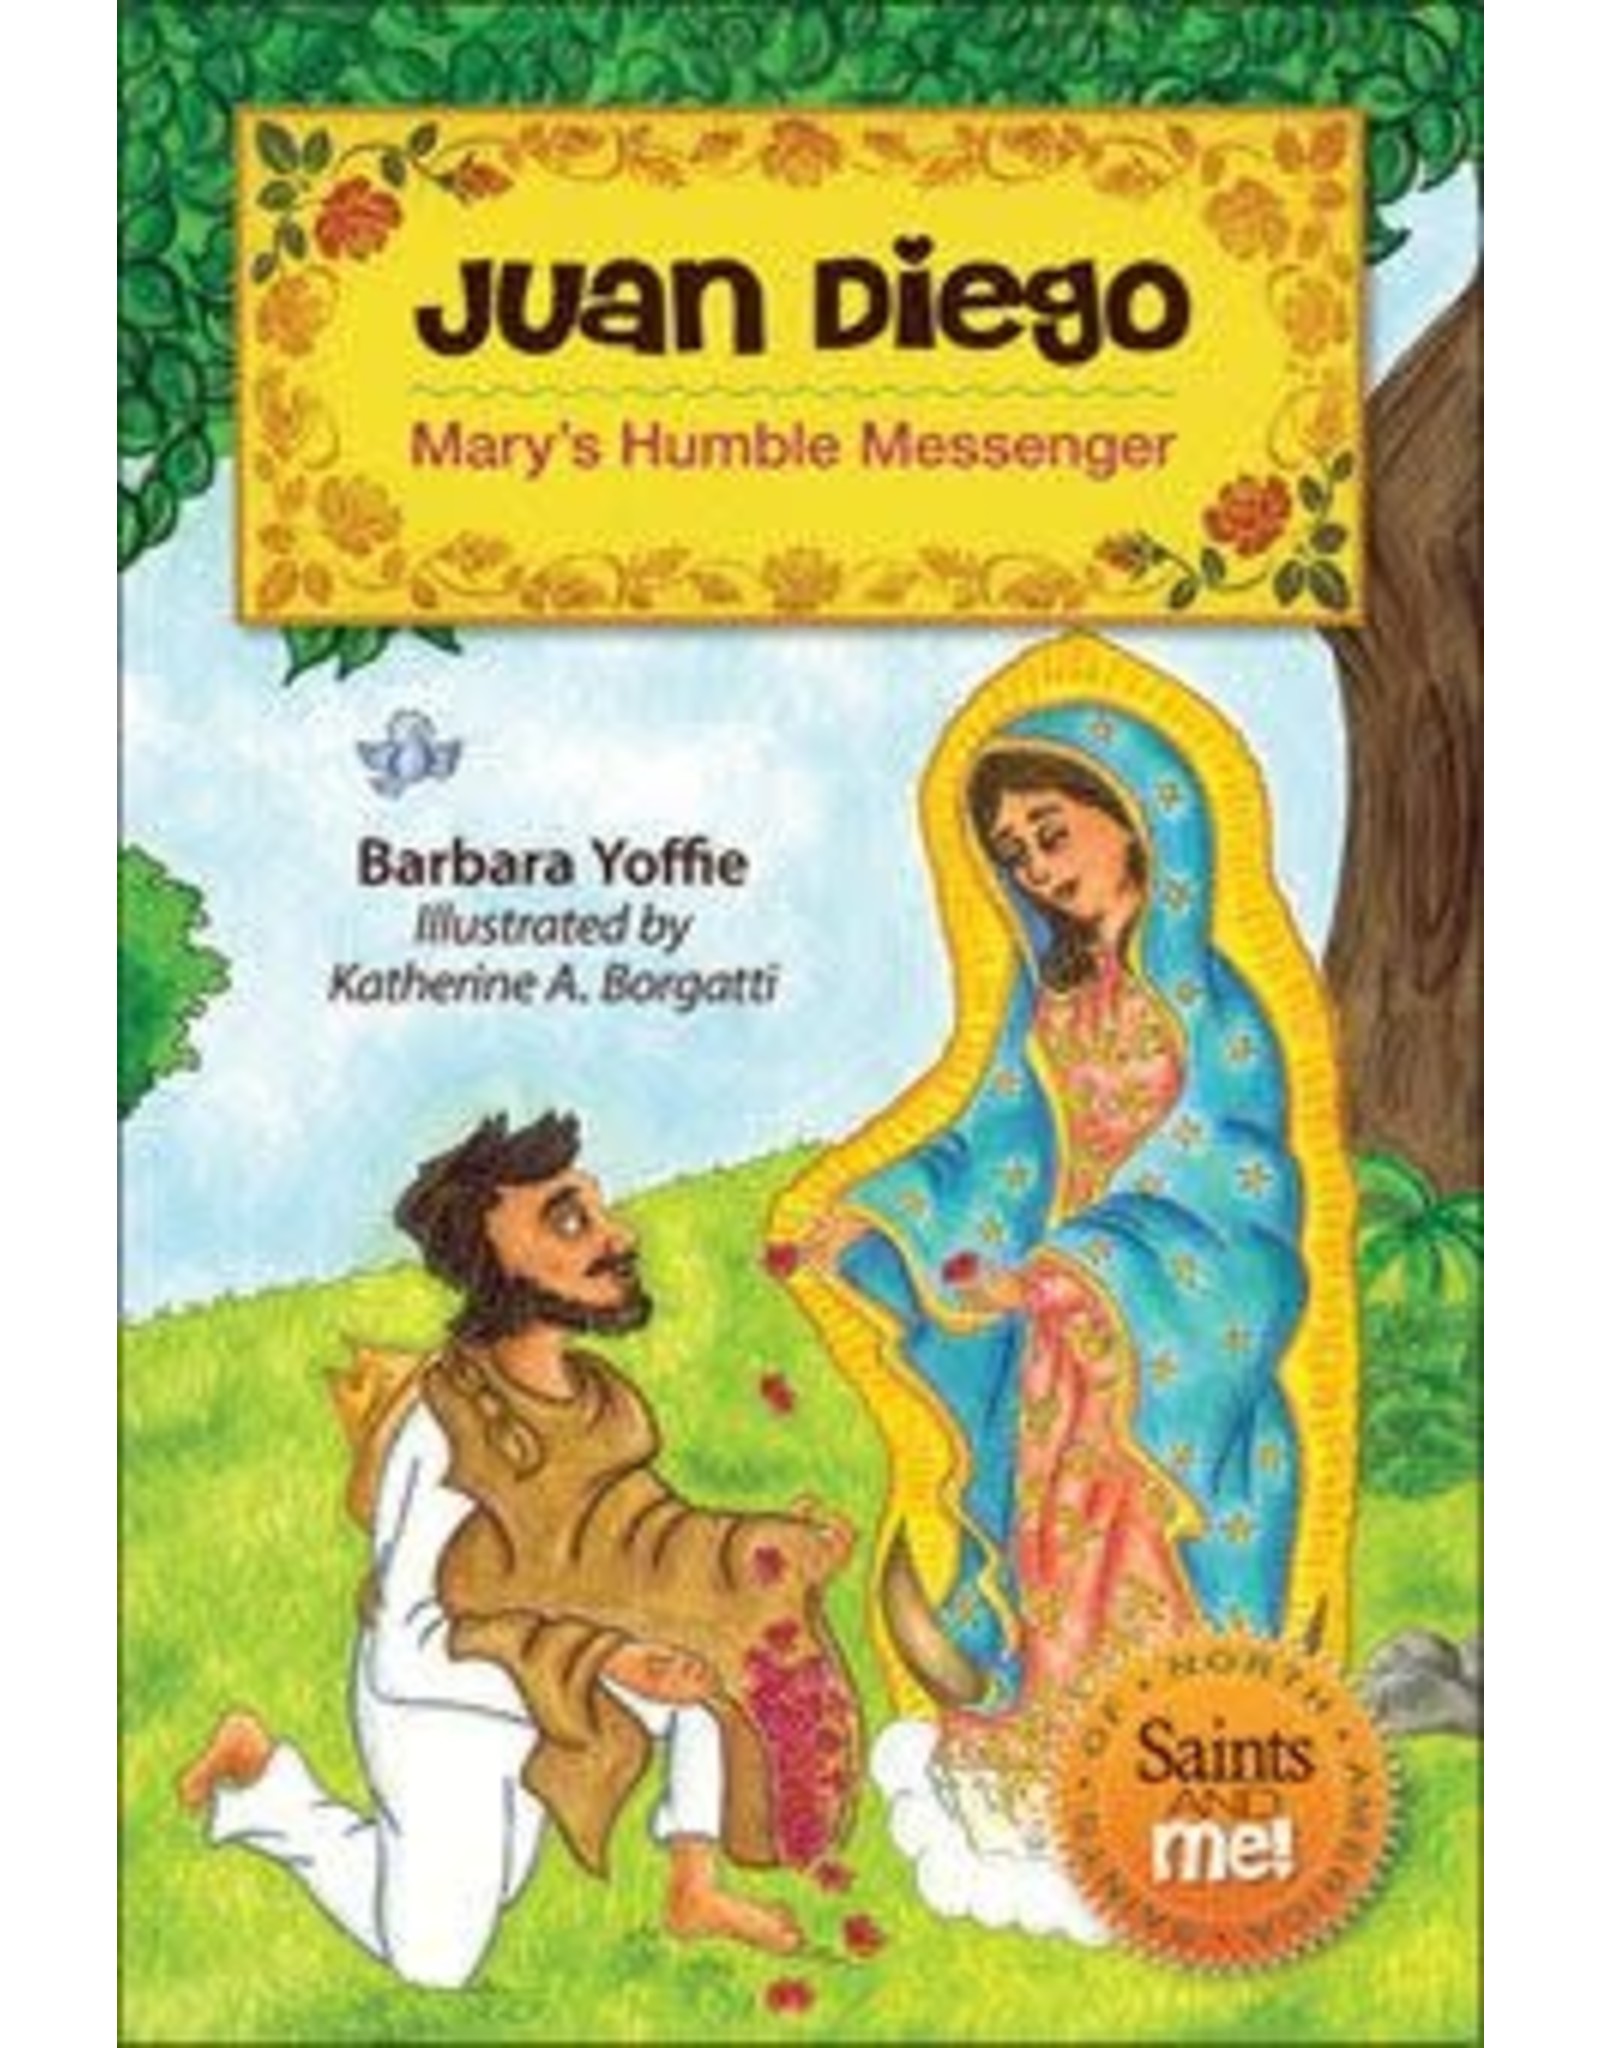 Juan Diego: Mary’s Humble Messenger